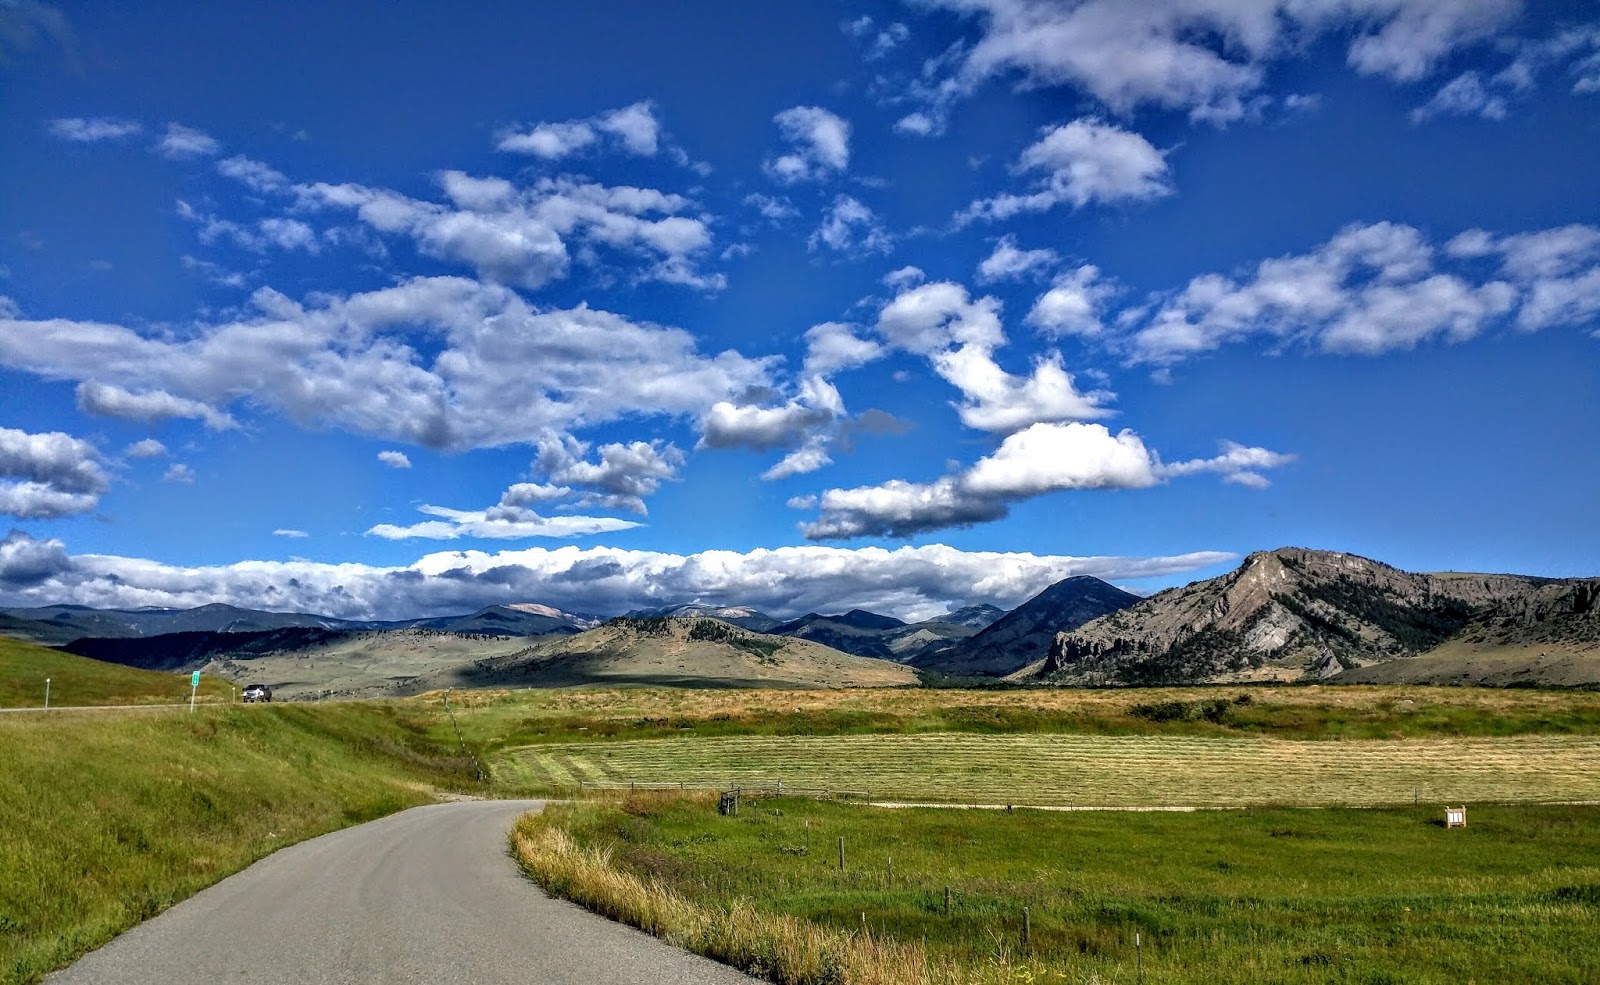 #039;MONTANA' - the Last Best Place and original Big Sky Country